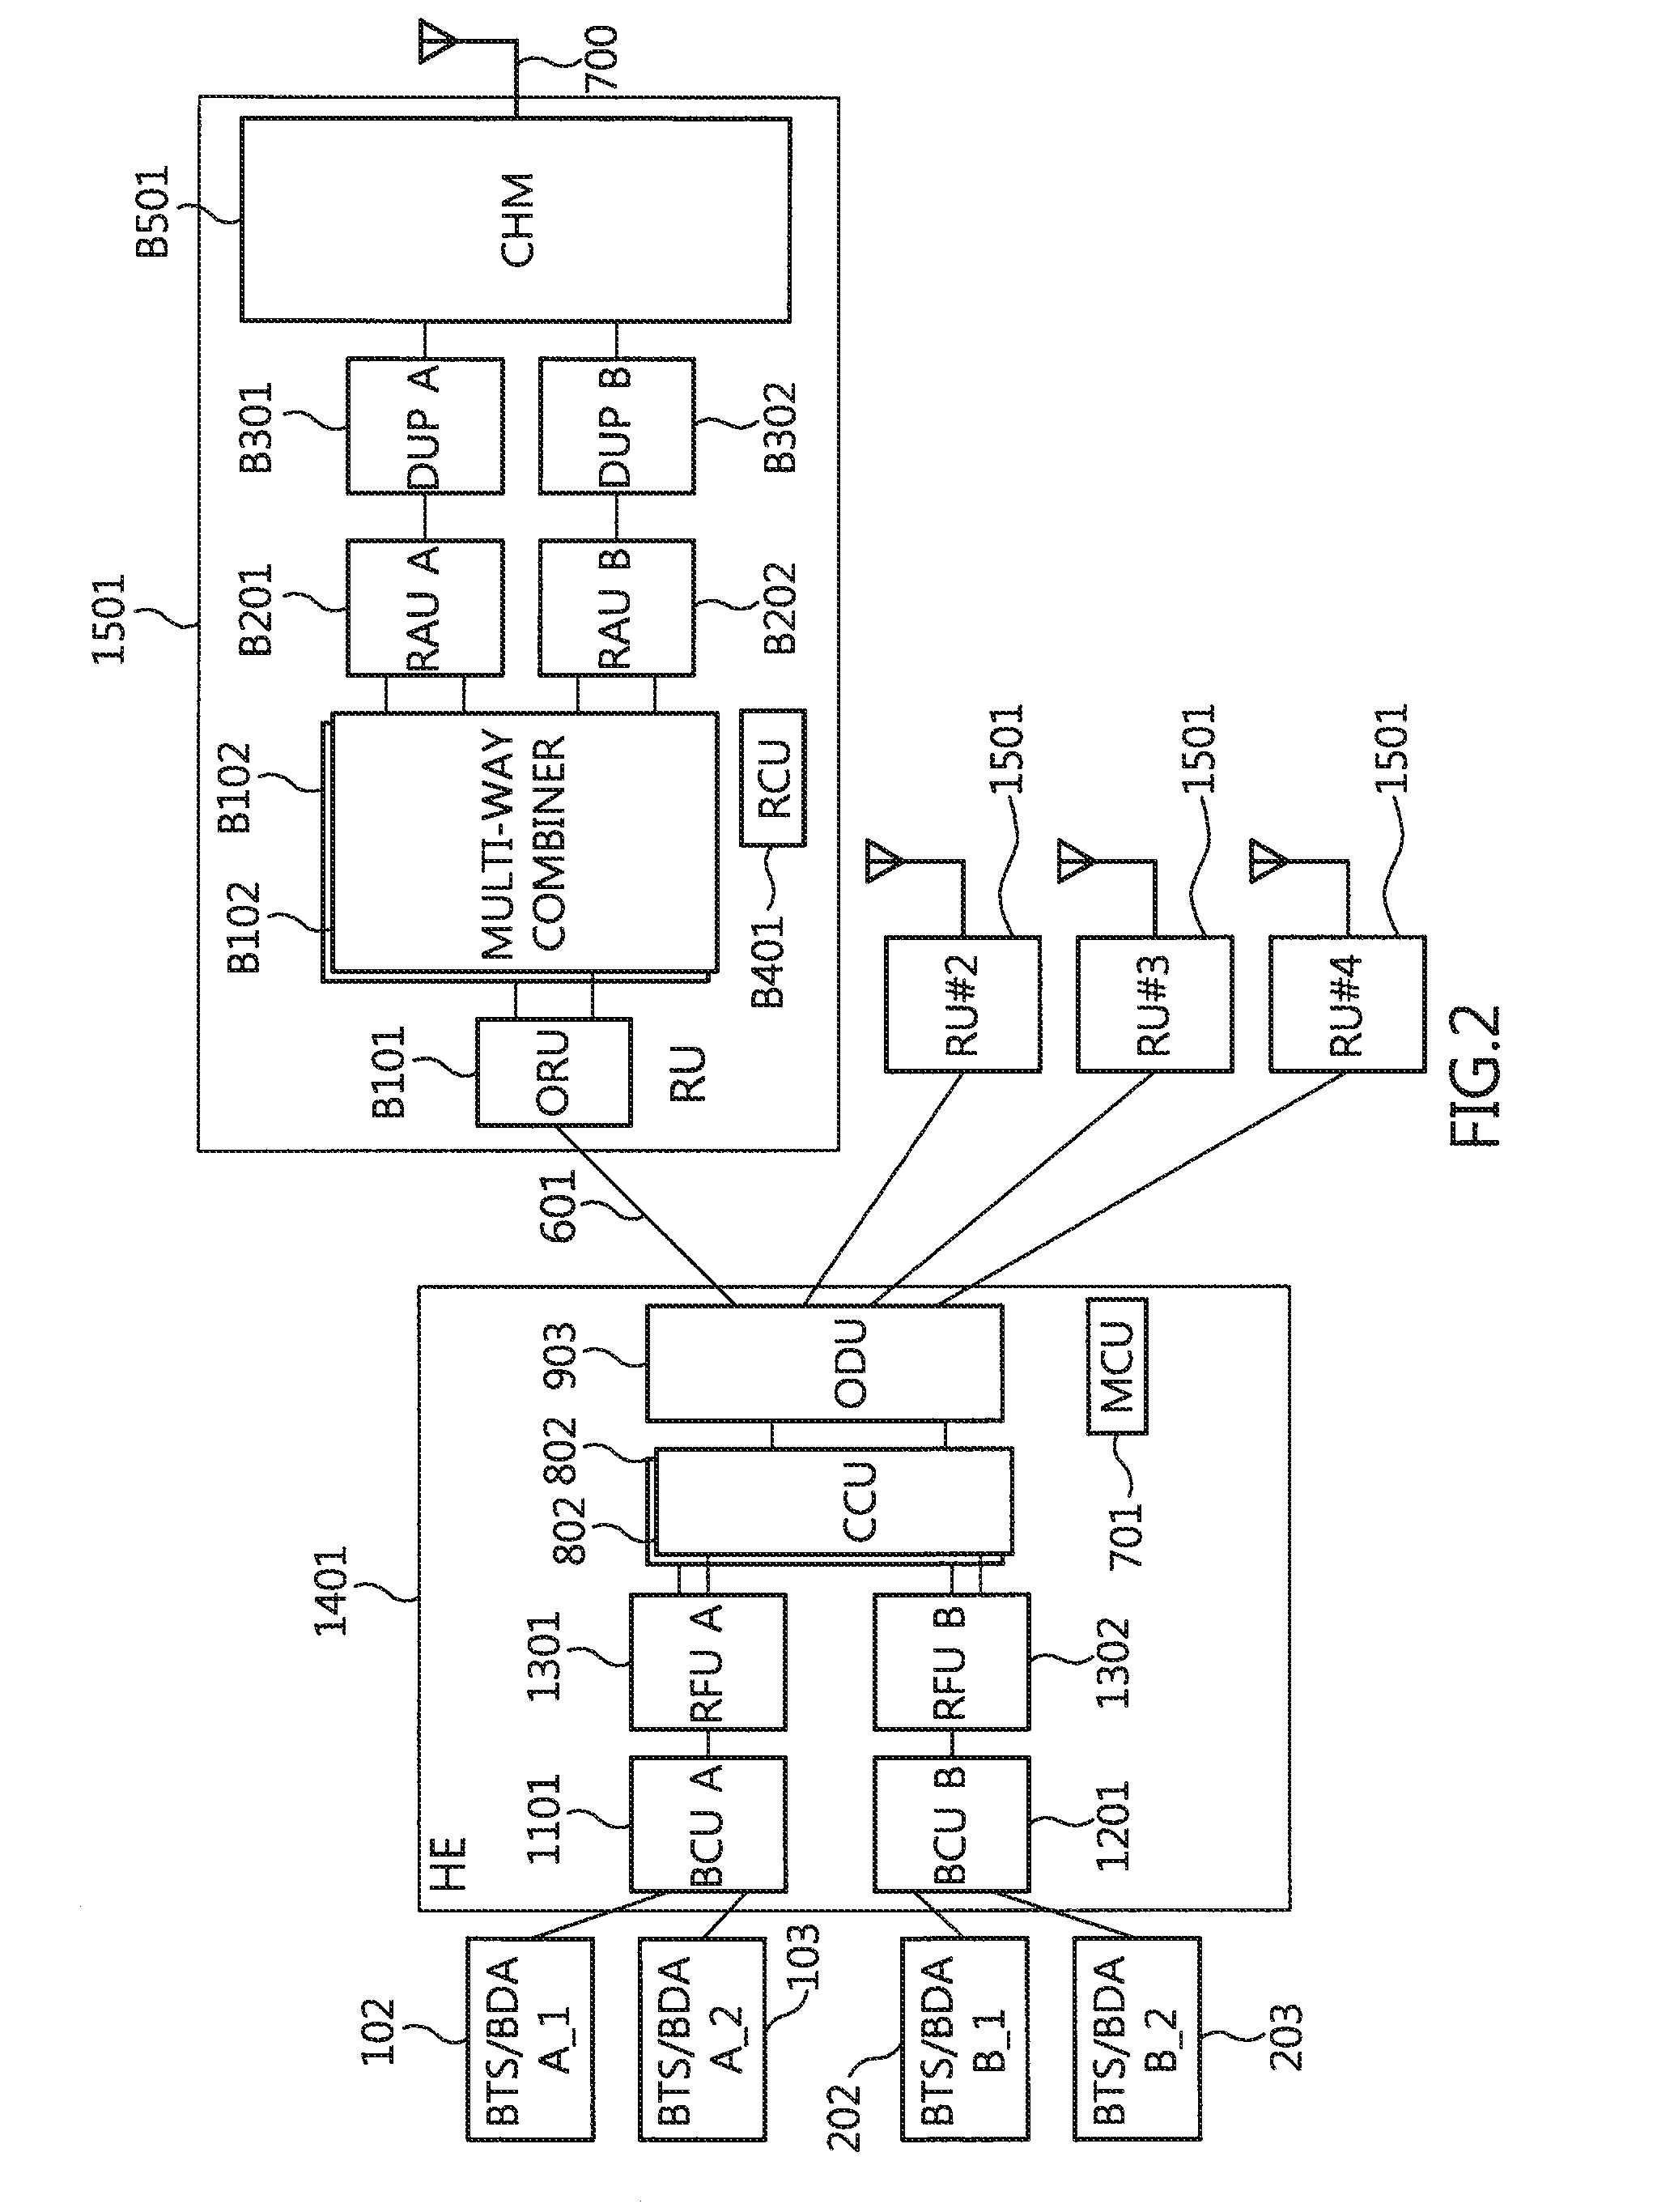 Optic distributed antenna system supporting multi-band multi-carrier service over a reduced number of optic core lines